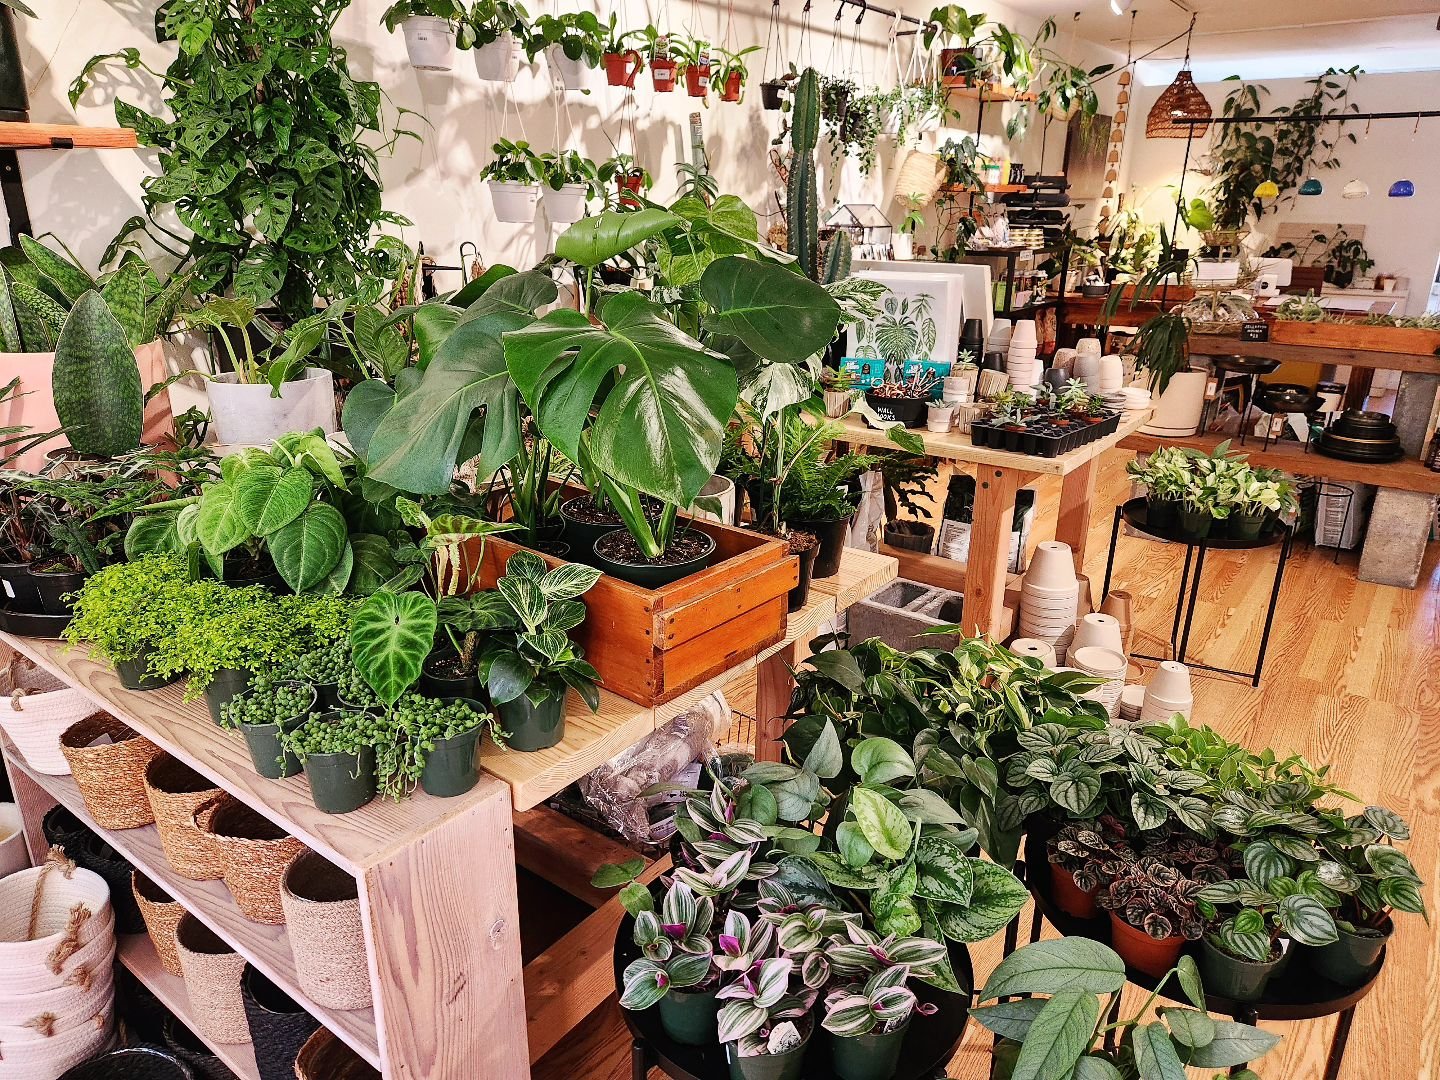 It's a beautiful day!! 

Fresh restock for the week in the shop! 🌿🖤

See you soon! 
.
.

#shoplocal 
#shopsmall 
#shoplongisland 
#plantsmakepeoplehappy
#wildportjeff 
#houseplantshop 
#plantshop
#portjefferson 
#longisland